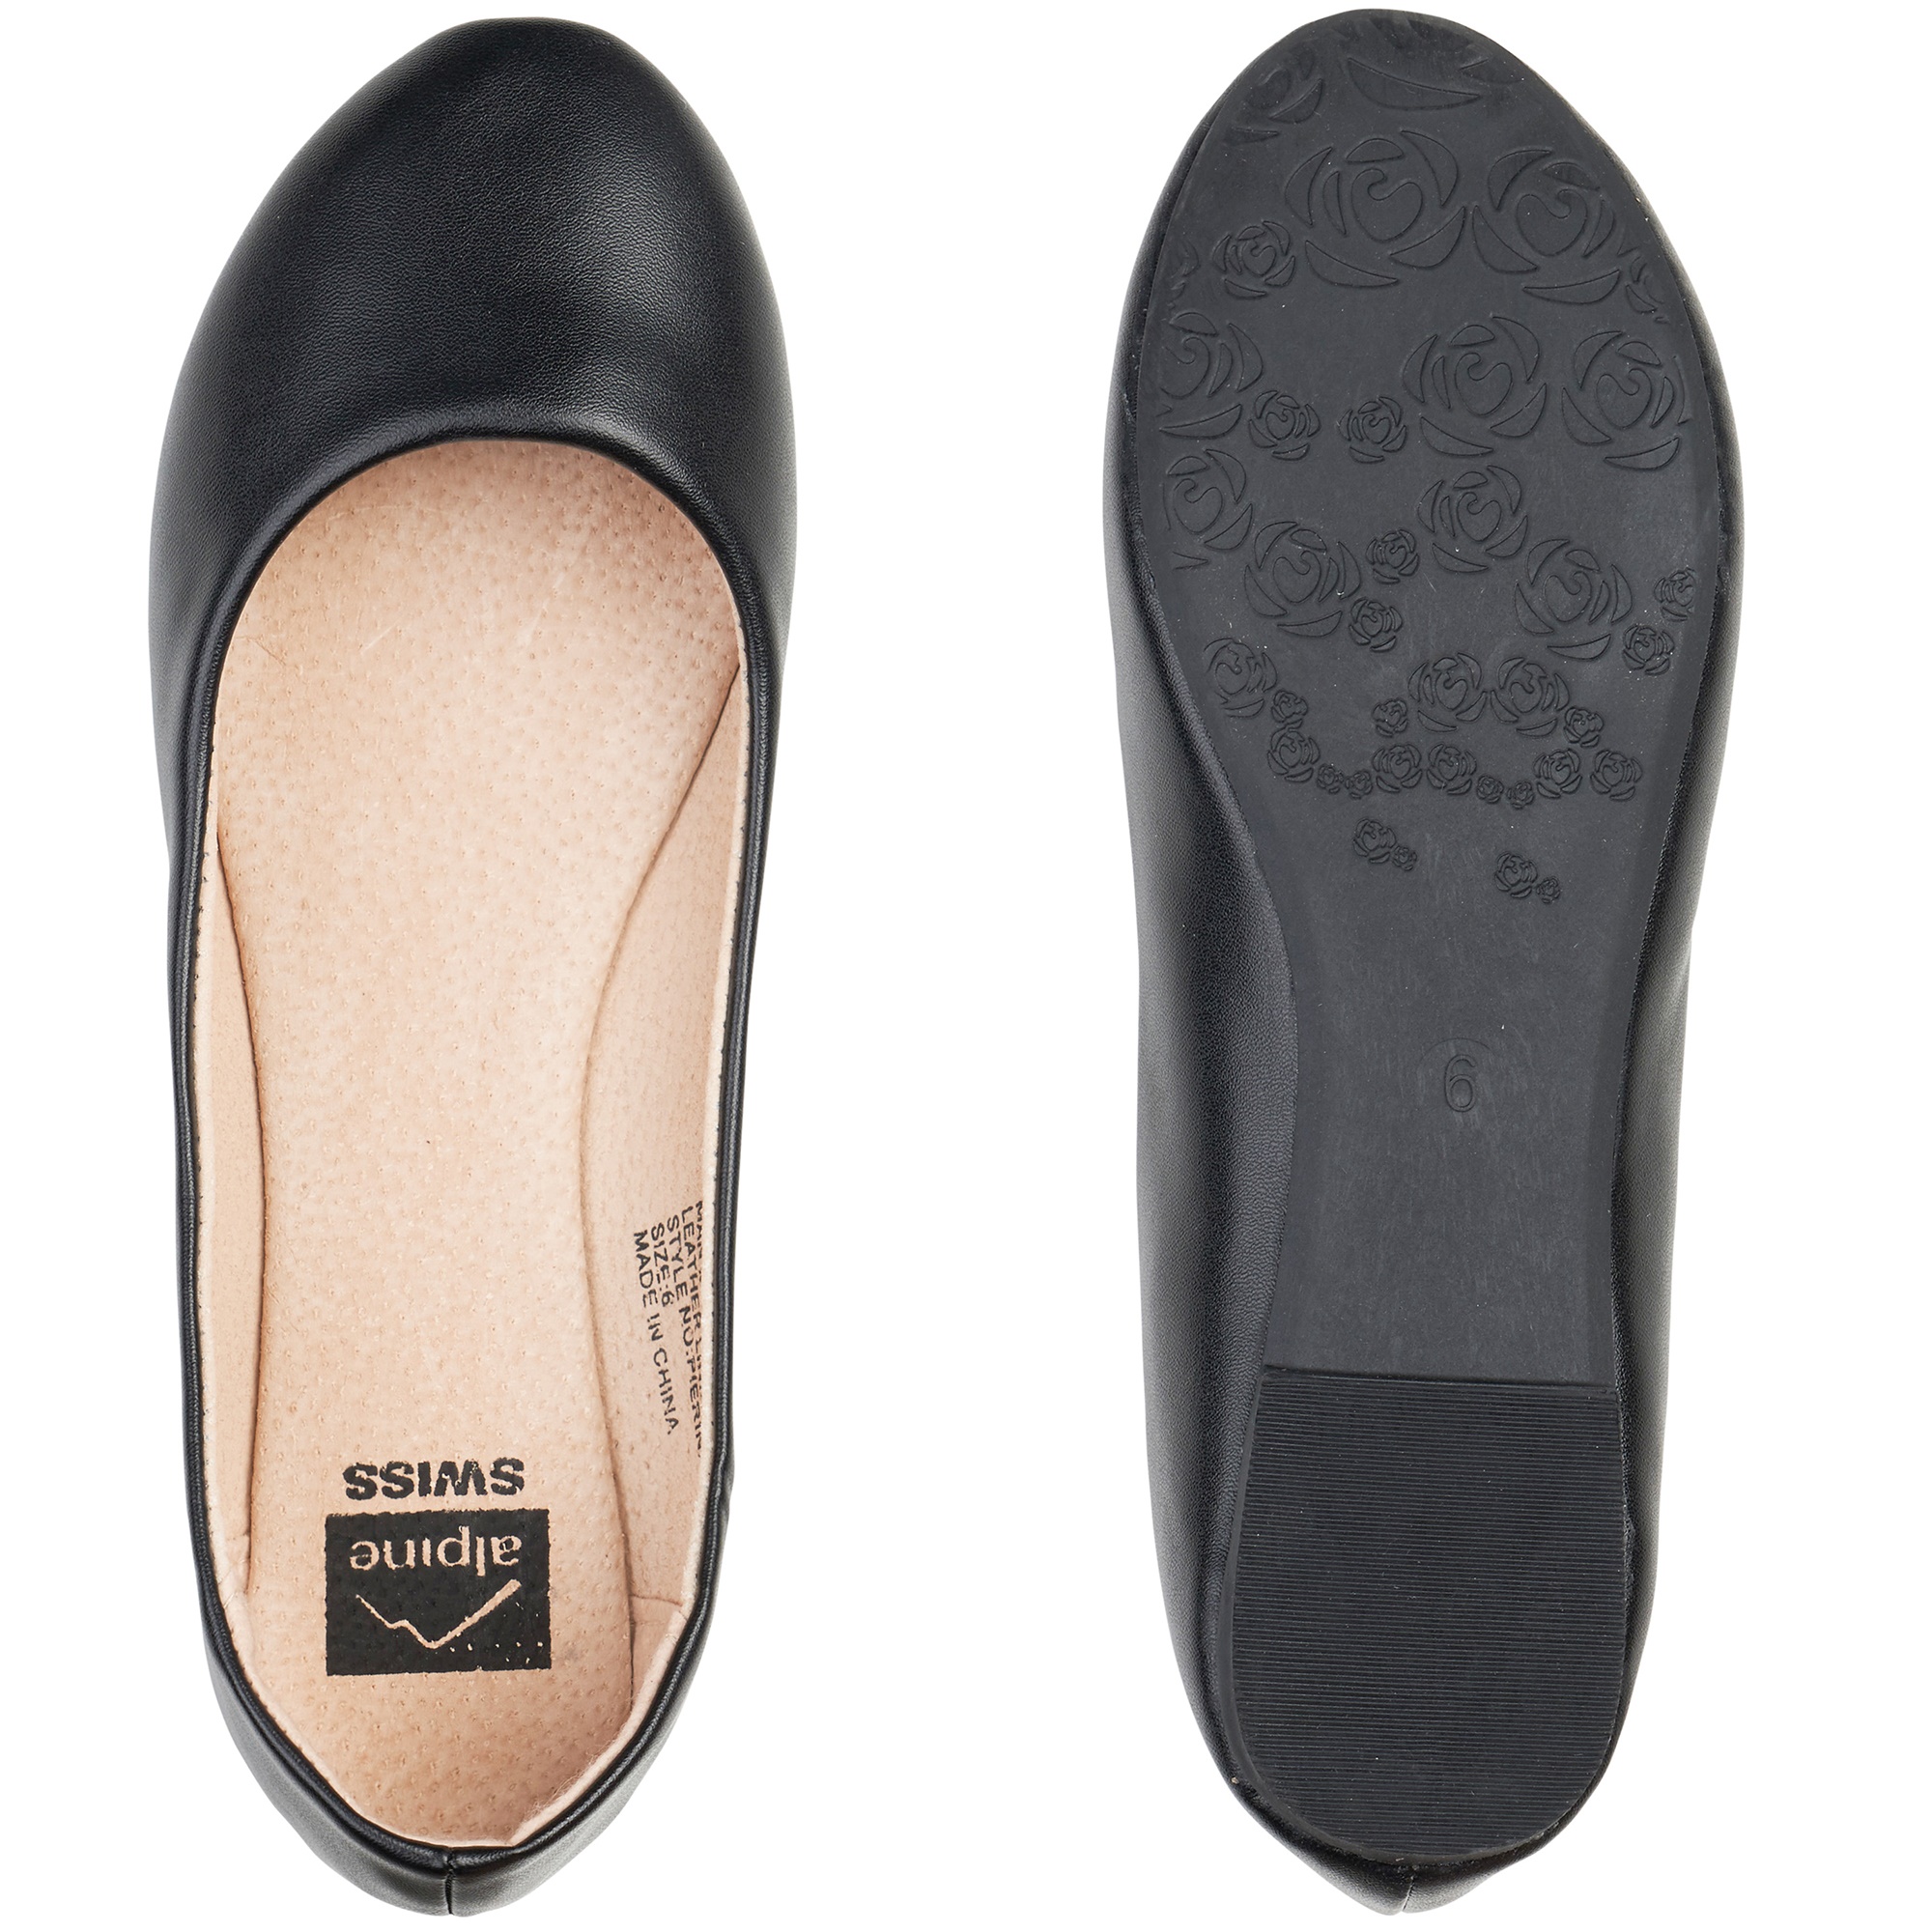 Alpine Swiss Pierina Womens Ballet Flats Leather Lined Classic Slip On Shoes - image 5 of 7